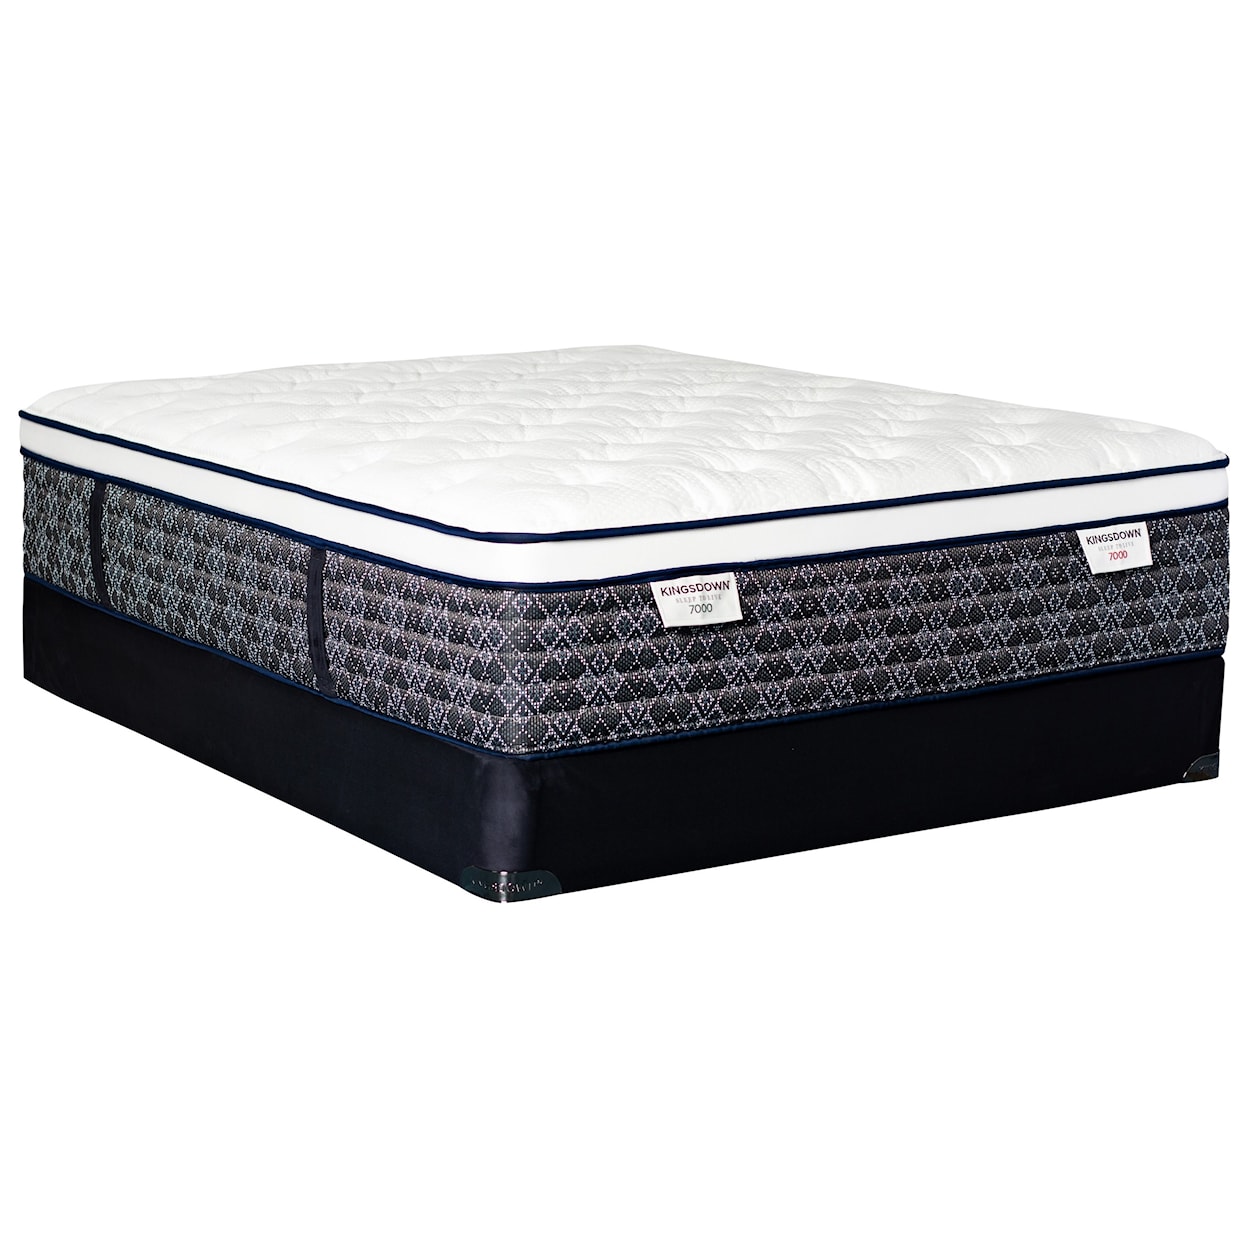 Kingsdown Sleep to Live 7000 Green Red ET King Pocketed Coil Mattress Set